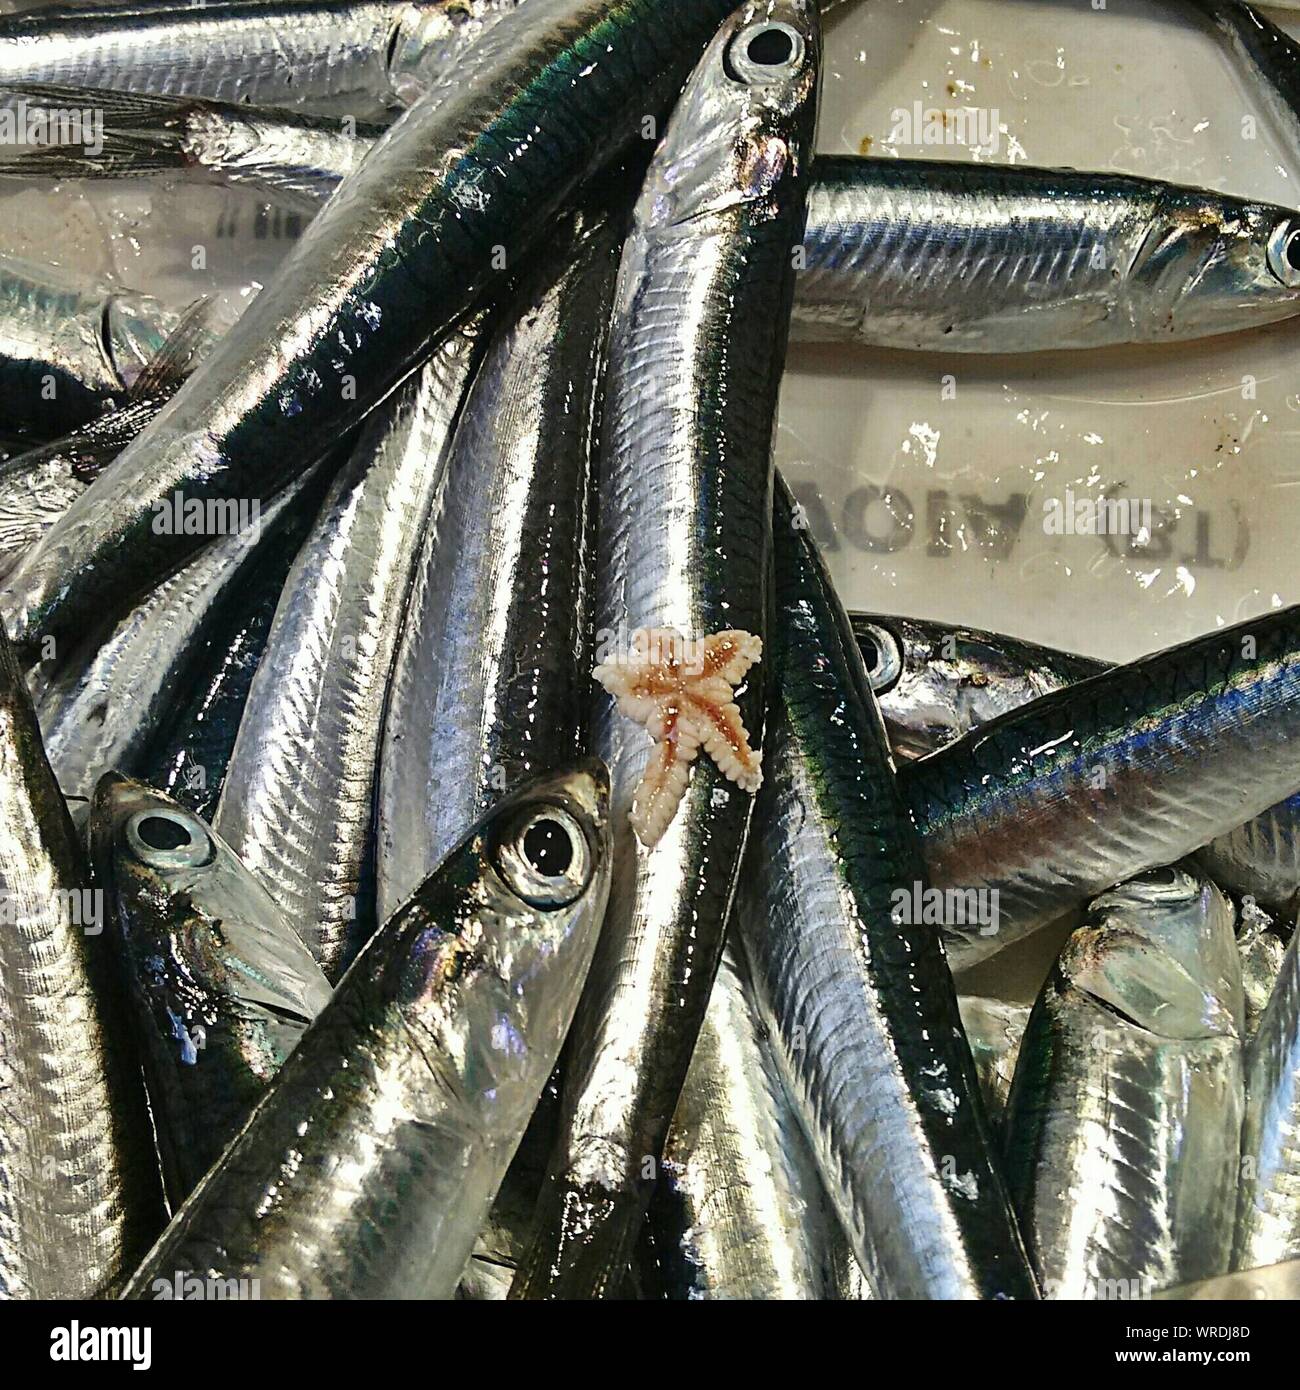 Fish Angle View Of Fishes In Container Stock Photo